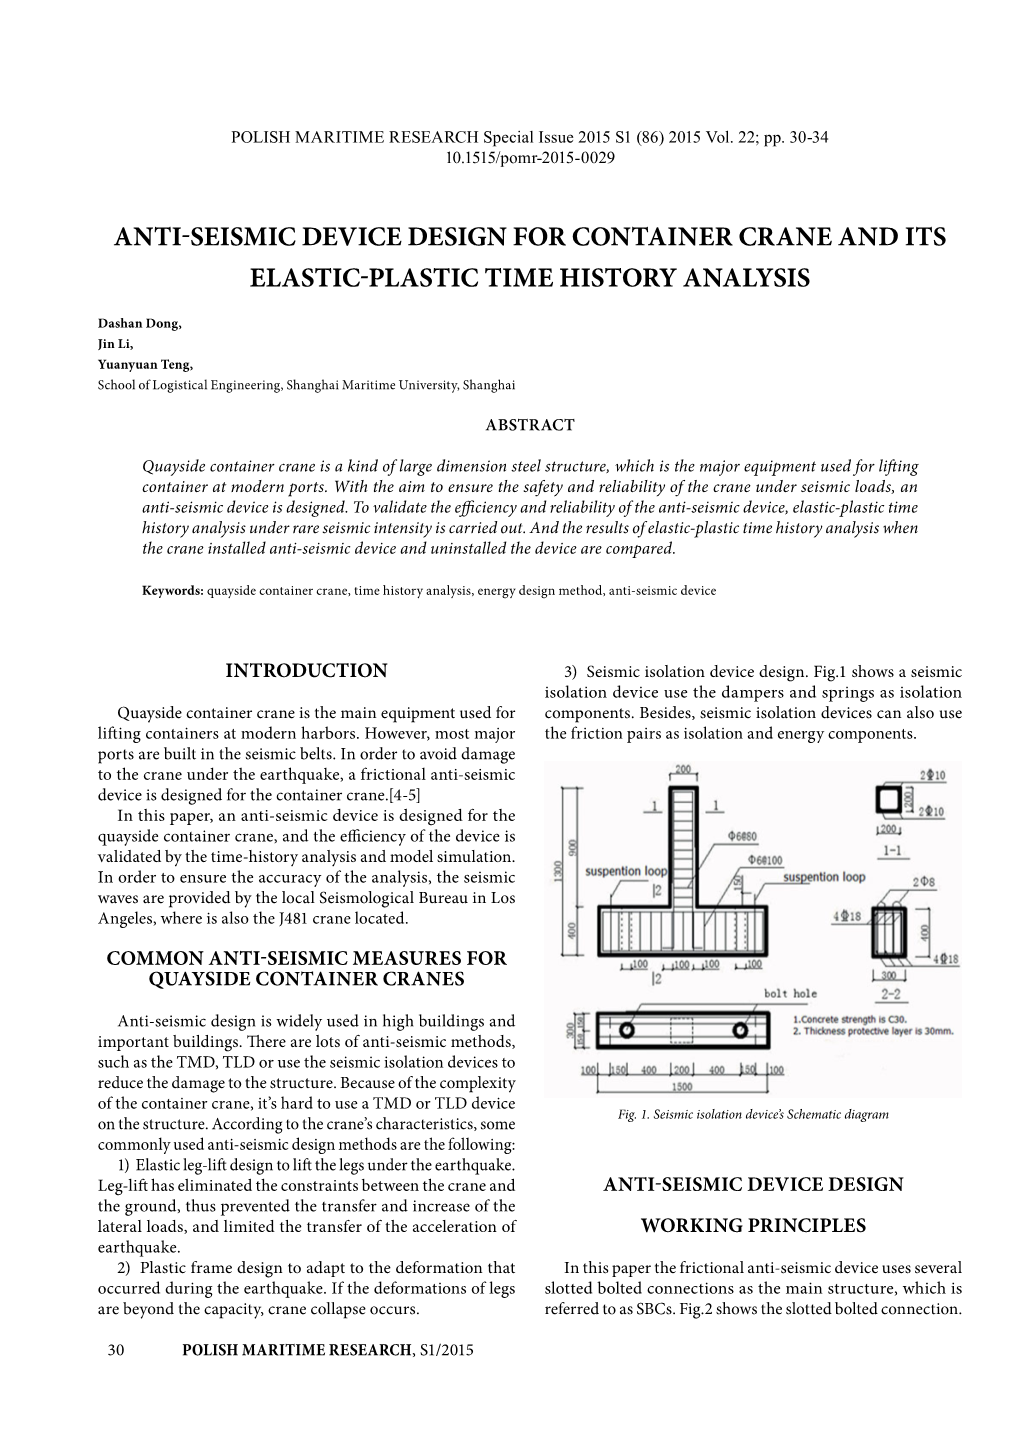 Anti-Seismic Device Design for Container Crane and Its Elastic-Plastic Time History Analysis